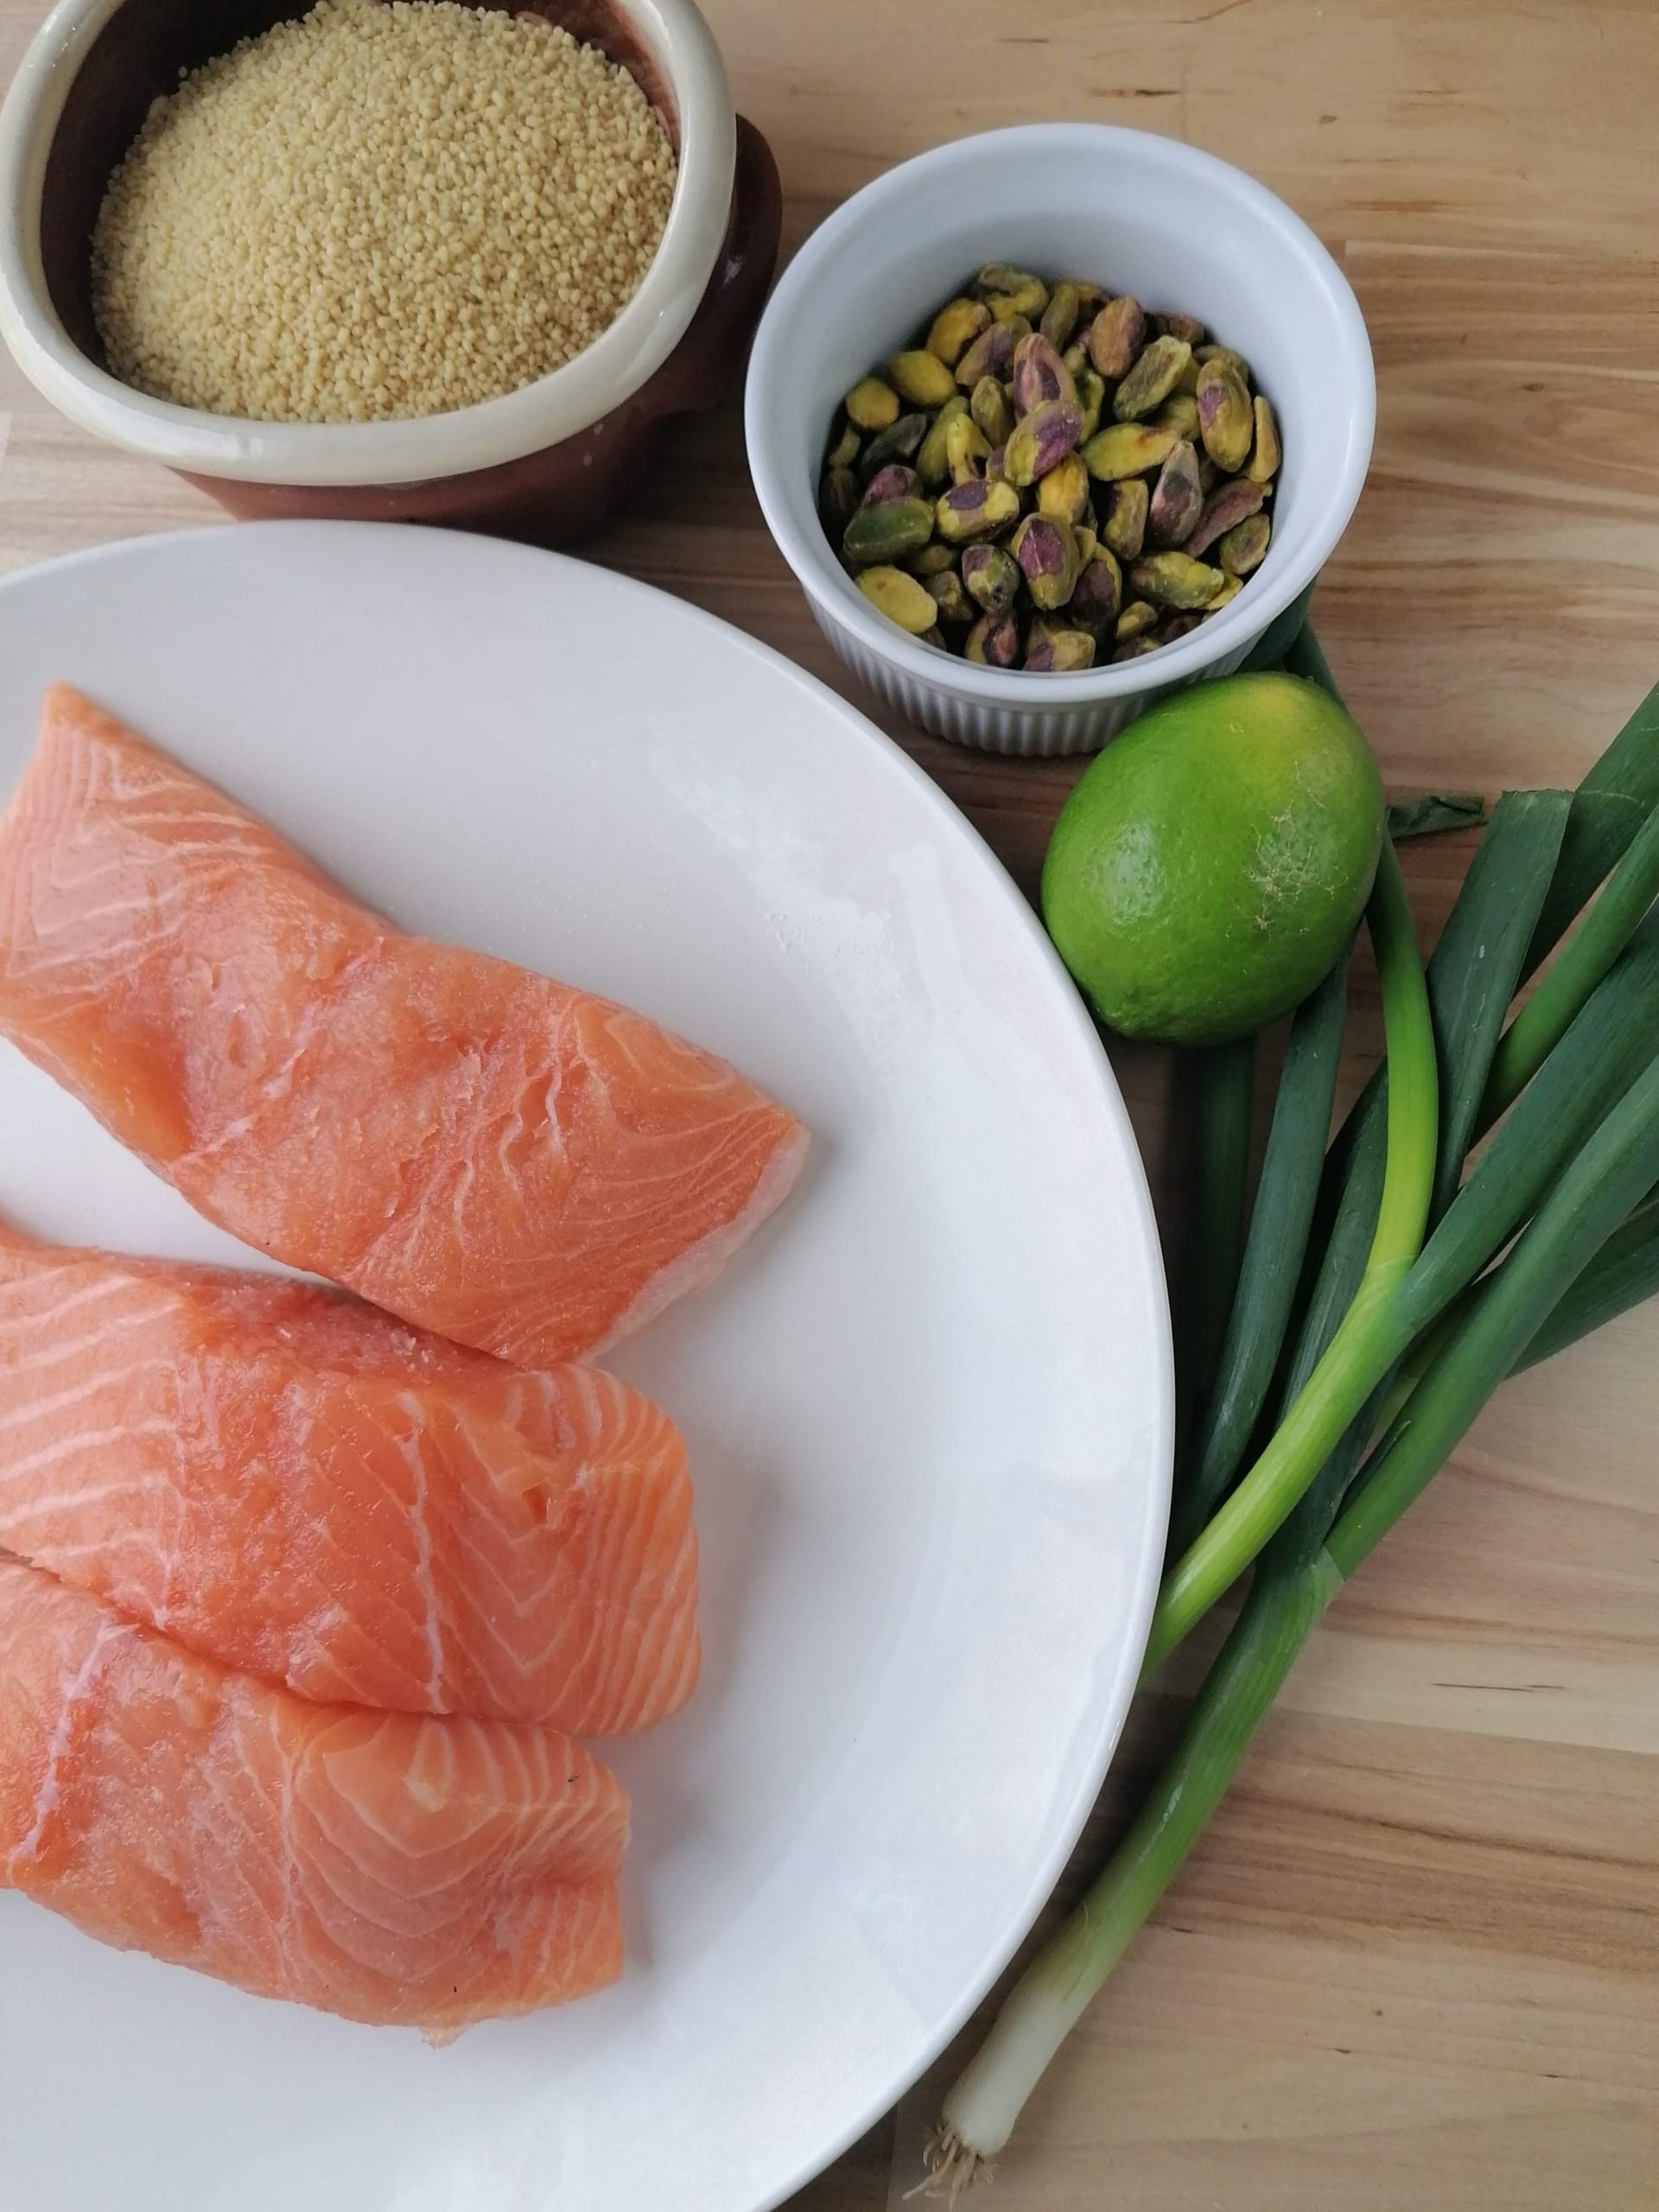 An image of salmon fillets, spring onions, pistachio nuts, couscous & lime